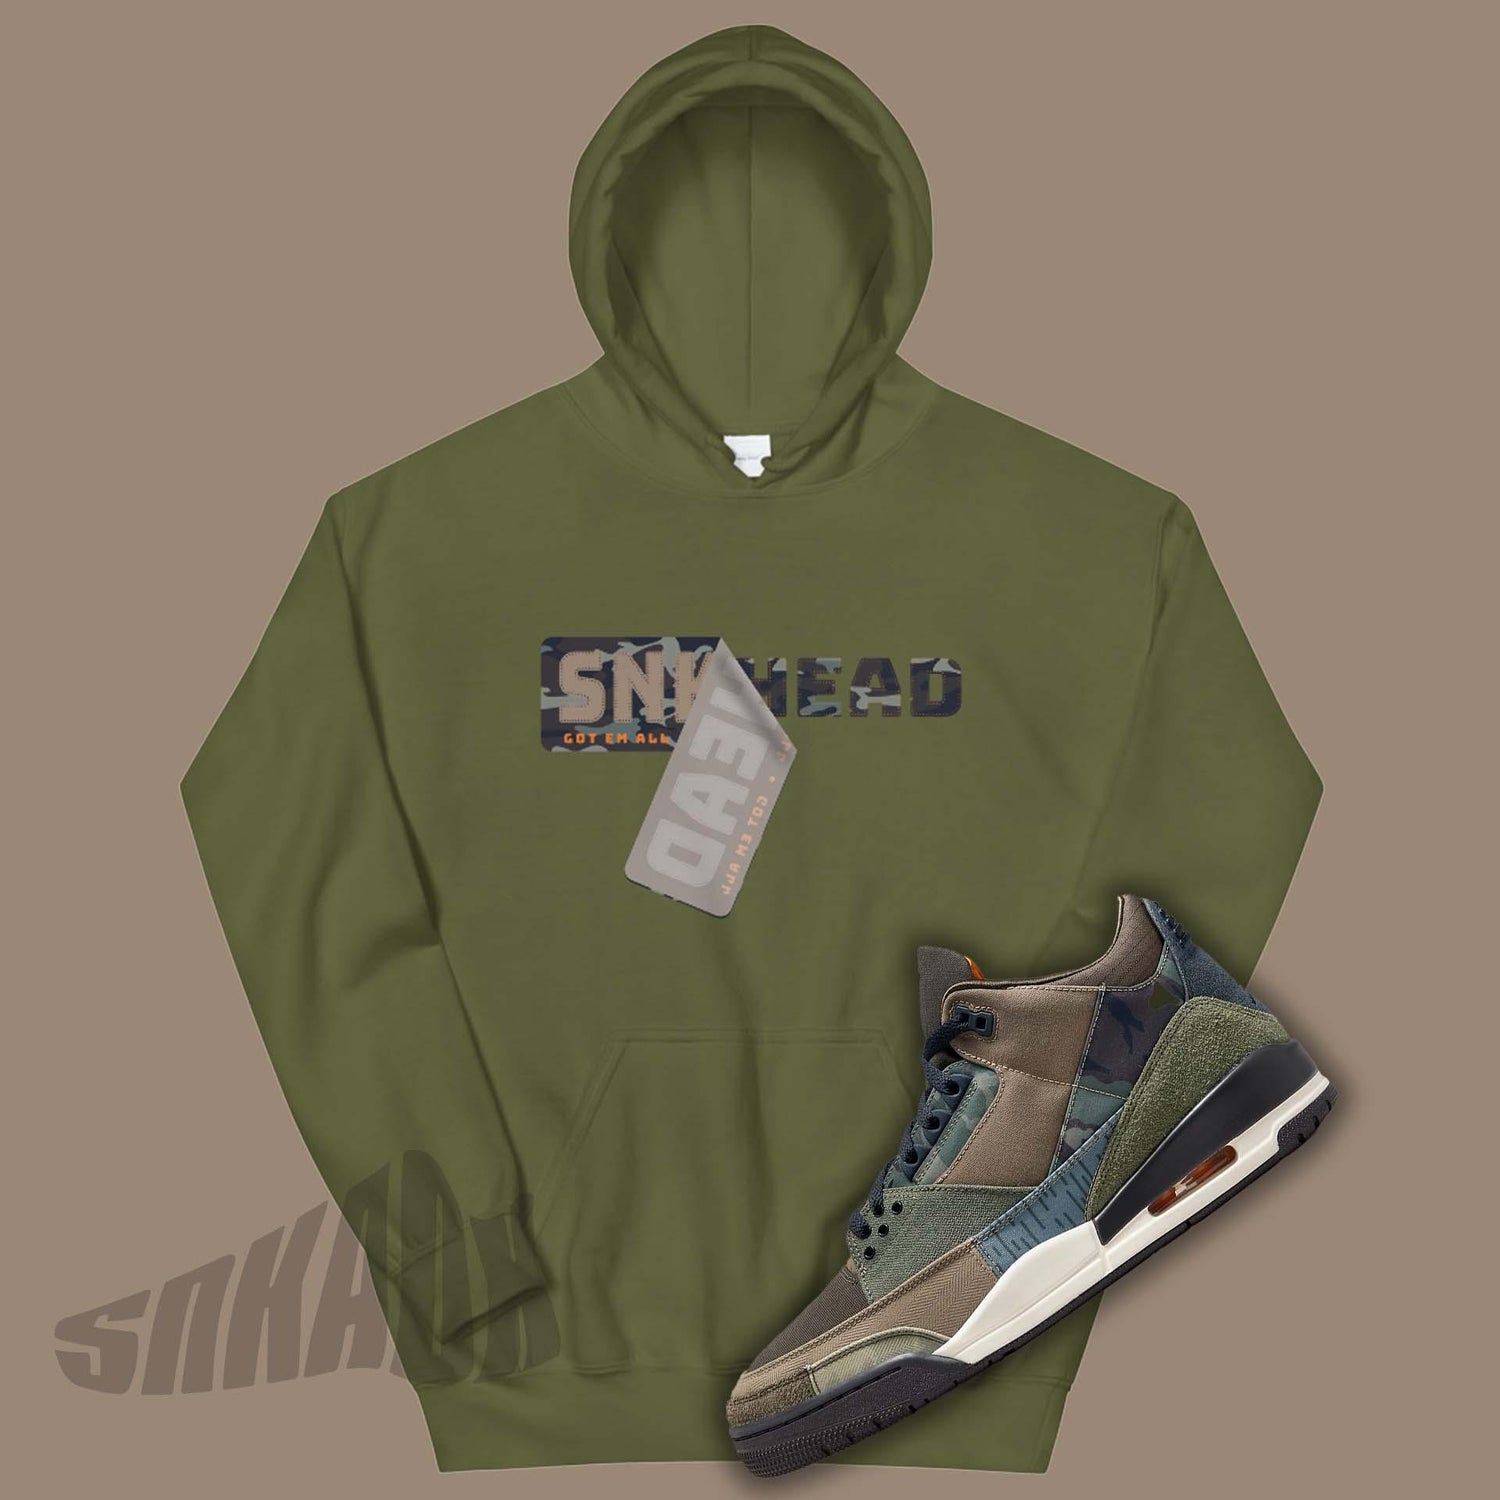 Army Green Hoodie With Sneakerhead To Match Air Jordan 3 Patchwork